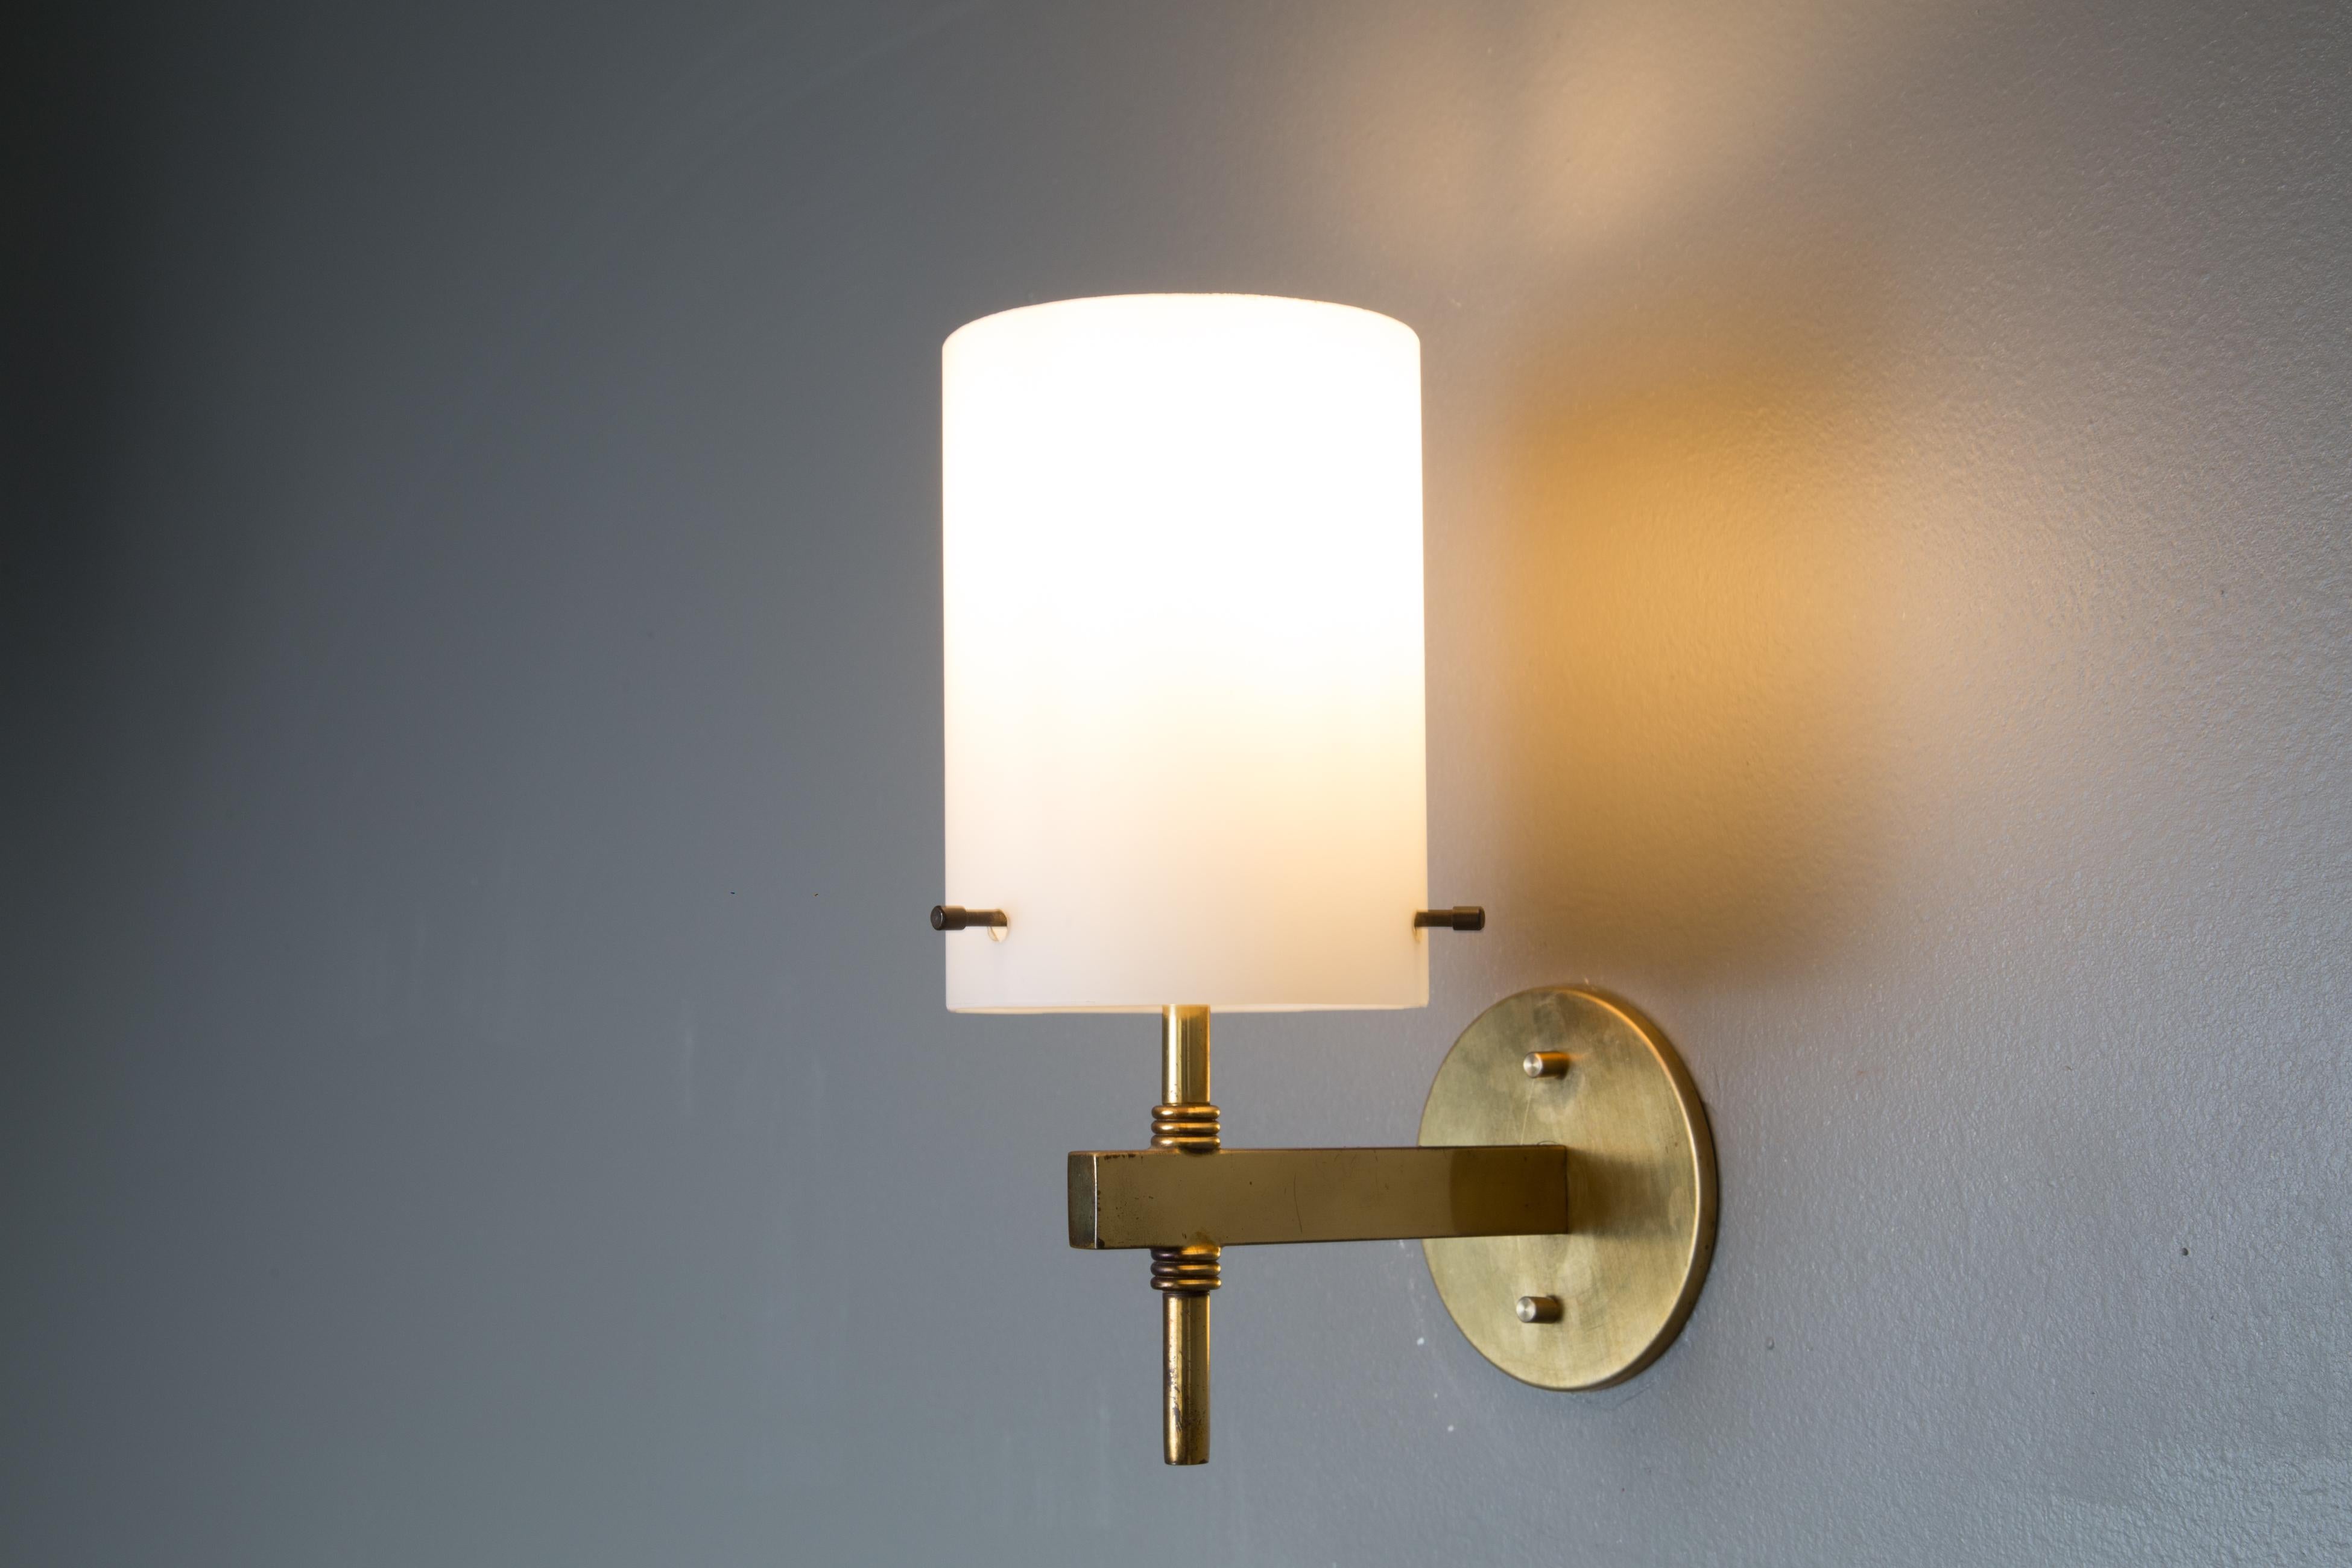 1950s Tito Agnoli brass & glass cylindrical wall lamp for O-Luce. Executed in opaline glass and patinated brass. An incredibly clean and refined design by one of the greatest Italian lighting icons of the modern age.

Price is per item. 4 lamps